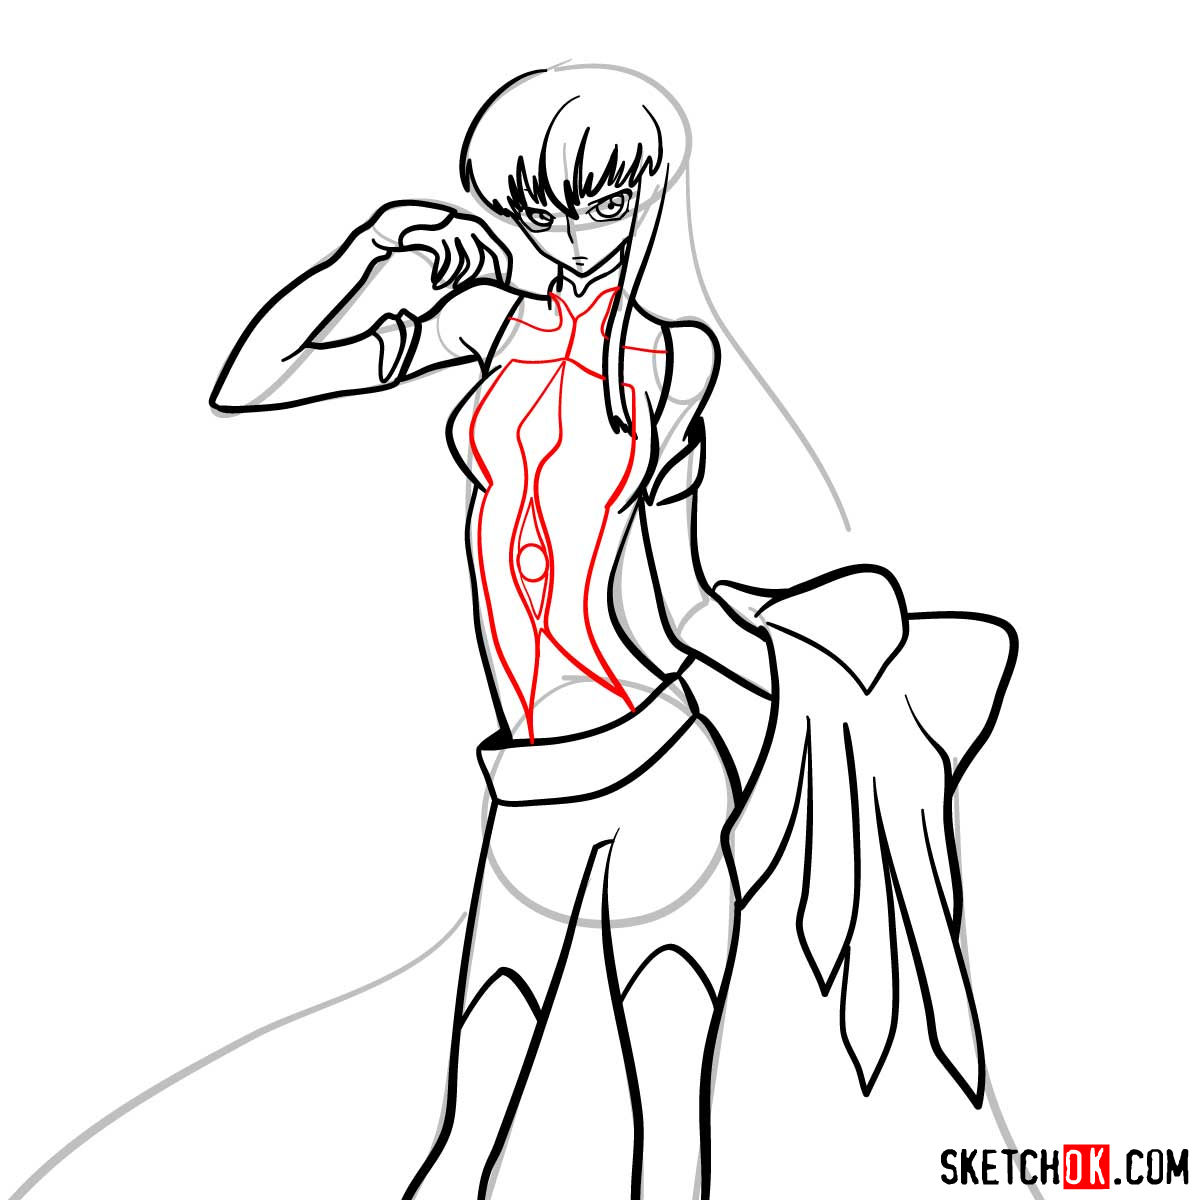 16 steps drawing guide of C.C. from Code Geass anime - step 13